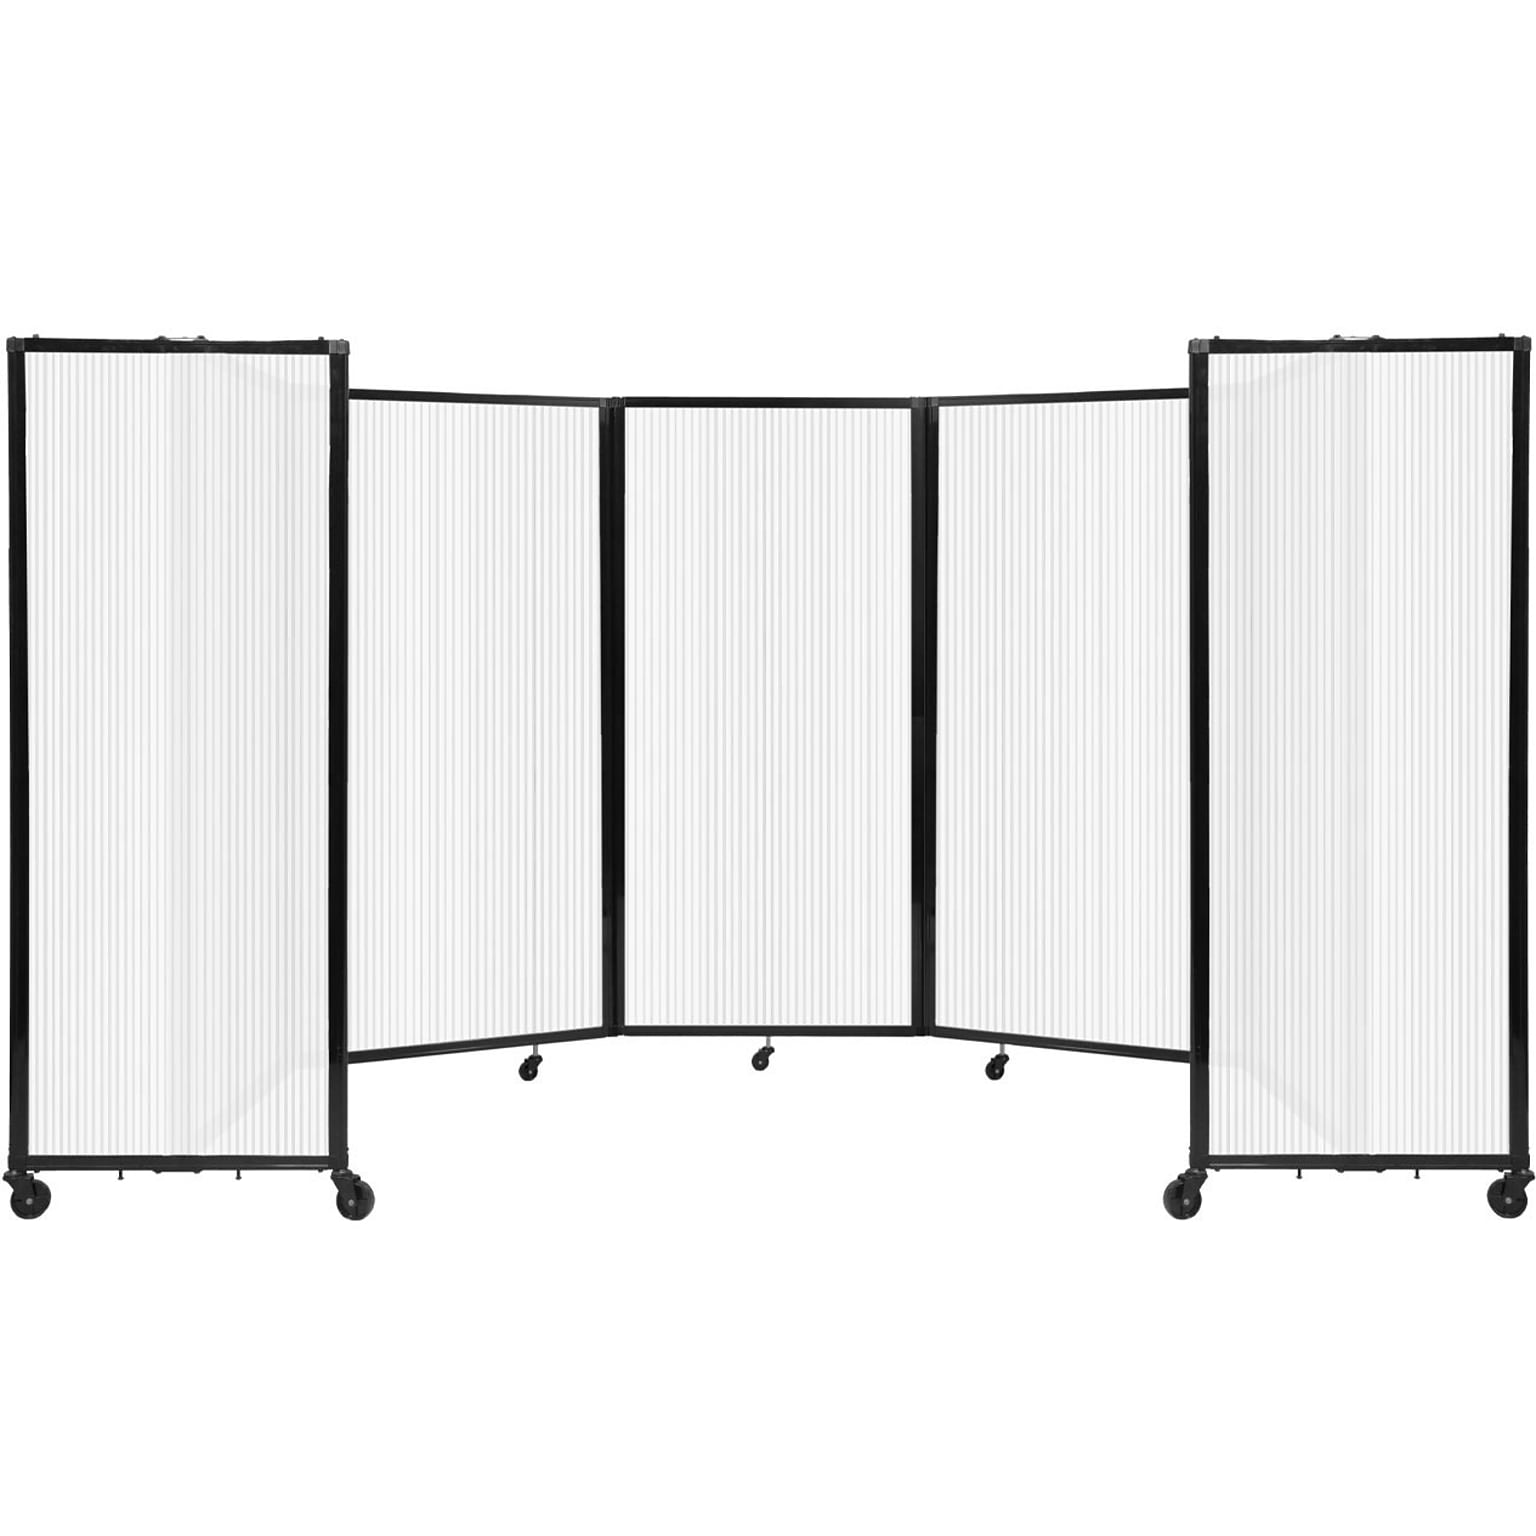 Versare The Room Divider 360 Freestanding Folding Portable Partition, 72H x 168W, Opal Fluted Polycarbonate (1272506)